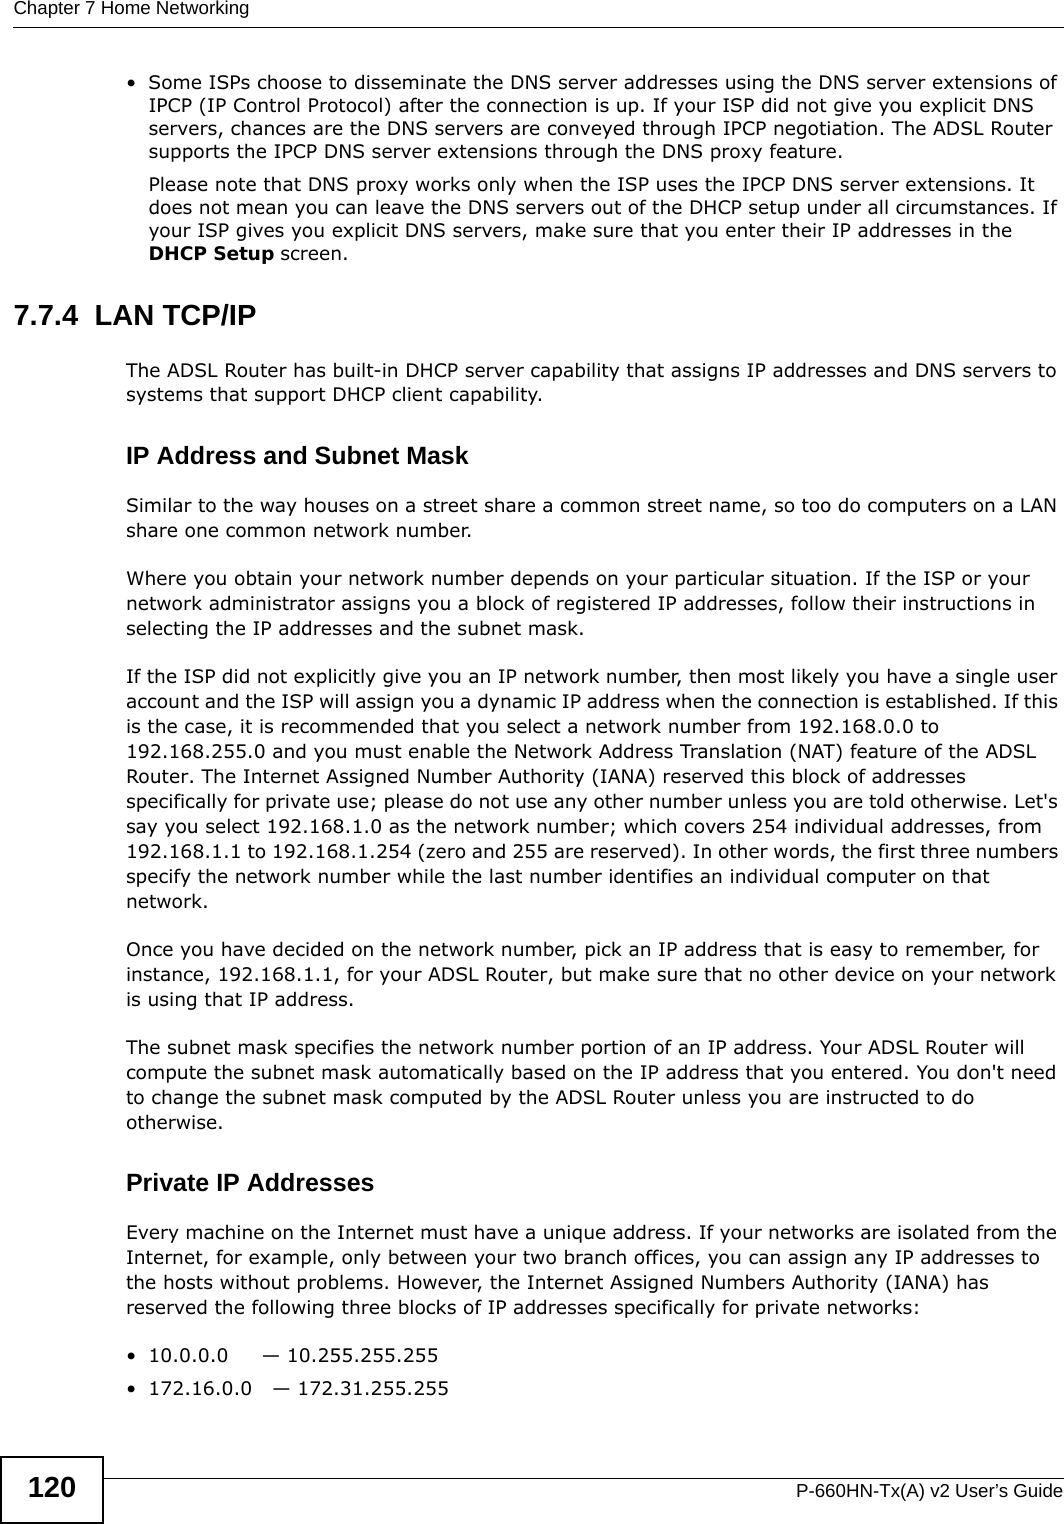 Chapter 7 Home NetworkingP-660HN-Tx(A) v2 User’s Guide120• Some ISPs choose to disseminate the DNS server addresses using the DNS server extensions of IPCP (IP Control Protocol) after the connection is up. If your ISP did not give you explicit DNS servers, chances are the DNS servers are conveyed through IPCP negotiation. The ADSL Router supports the IPCP DNS server extensions through the DNS proxy feature.Please note that DNS proxy works only when the ISP uses the IPCP DNS server extensions. It does not mean you can leave the DNS servers out of the DHCP setup under all circumstances. If your ISP gives you explicit DNS servers, make sure that you enter their IP addresses in the DHCP Setup screen.7.7.4  LAN TCP/IP The ADSL Router has built-in DHCP server capability that assigns IP addresses and DNS servers to systems that support DHCP client capability.IP Address and Subnet MaskSimilar to the way houses on a street share a common street name, so too do computers on a LAN share one common network number.Where you obtain your network number depends on your particular situation. If the ISP or your network administrator assigns you a block of registered IP addresses, follow their instructions in selecting the IP addresses and the subnet mask.If the ISP did not explicitly give you an IP network number, then most likely you have a single user account and the ISP will assign you a dynamic IP address when the connection is established. If this is the case, it is recommended that you select a network number from 192.168.0.0 to 192.168.255.0 and you must enable the Network Address Translation (NAT) feature of the ADSL Router. The Internet Assigned Number Authority (IANA) reserved this block of addresses specifically for private use; please do not use any other number unless you are told otherwise. Let&apos;s say you select 192.168.1.0 as the network number; which covers 254 individual addresses, from 192.168.1.1 to 192.168.1.254 (zero and 255 are reserved). In other words, the first three numbers specify the network number while the last number identifies an individual computer on that network.Once you have decided on the network number, pick an IP address that is easy to remember, for instance, 192.168.1.1, for your ADSL Router, but make sure that no other device on your network is using that IP address.The subnet mask specifies the network number portion of an IP address. Your ADSL Router will compute the subnet mask automatically based on the IP address that you entered. You don&apos;t need to change the subnet mask computed by the ADSL Router unless you are instructed to do otherwise.Private IP AddressesEvery machine on the Internet must have a unique address. If your networks are isolated from the Internet, for example, only between your two branch offices, you can assign any IP addresses to the hosts without problems. However, the Internet Assigned Numbers Authority (IANA) has reserved the following three blocks of IP addresses specifically for private networks:• 10.0.0.0     — 10.255.255.255• 172.16.0.0   — 172.31.255.255